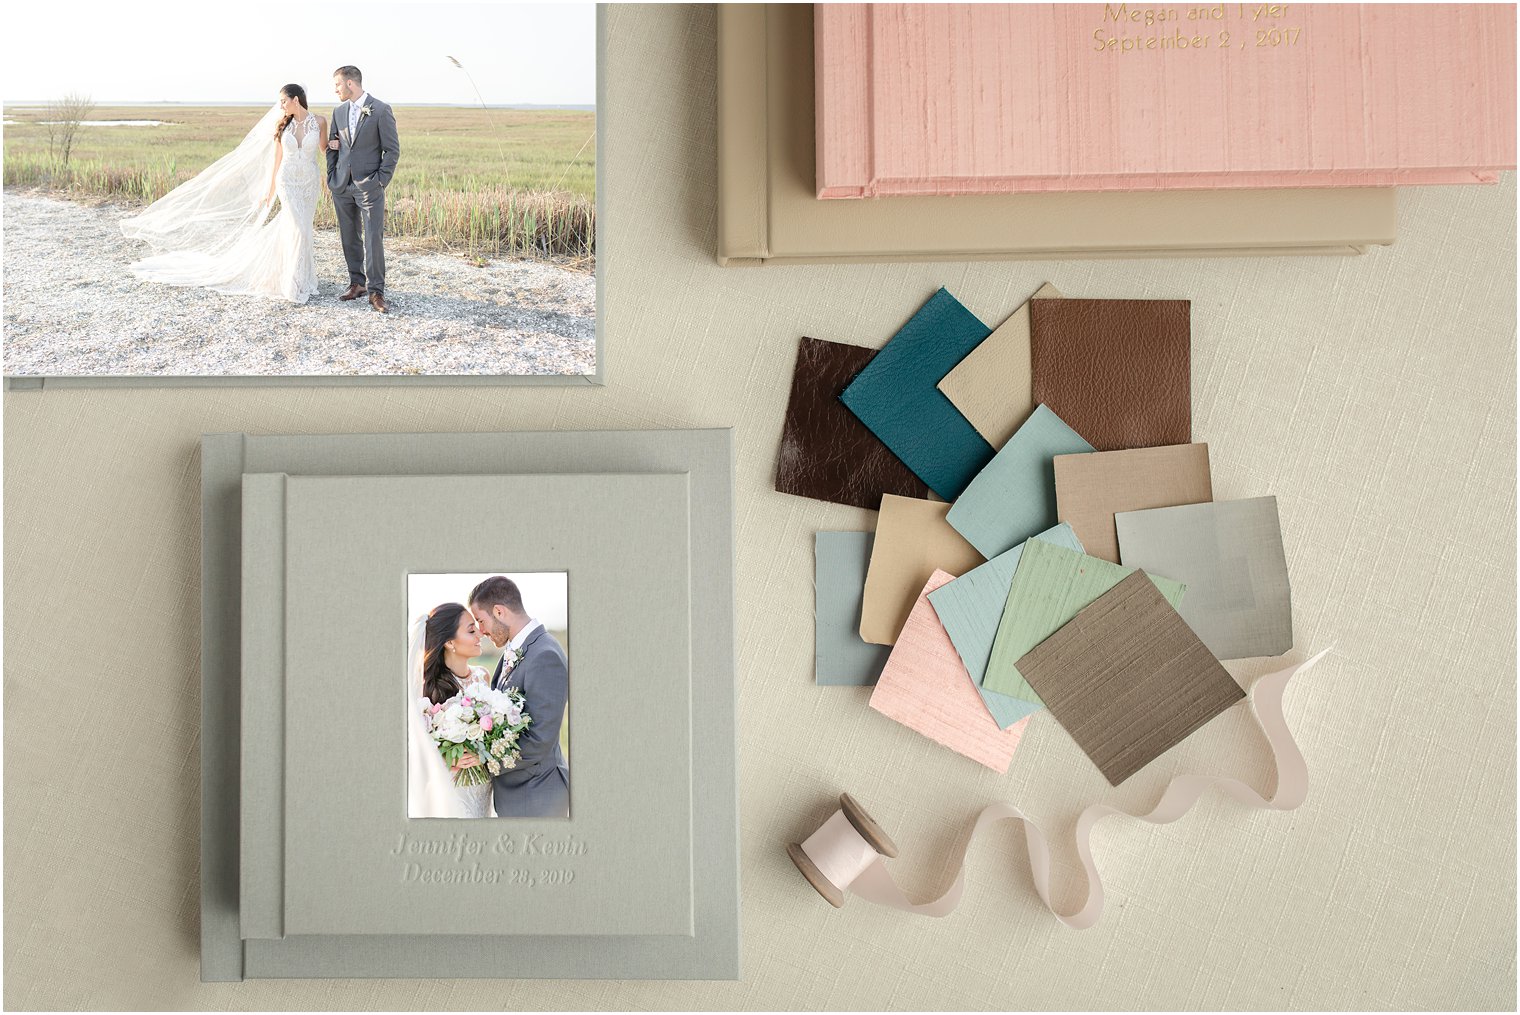 Linen wedding albums with color swatches